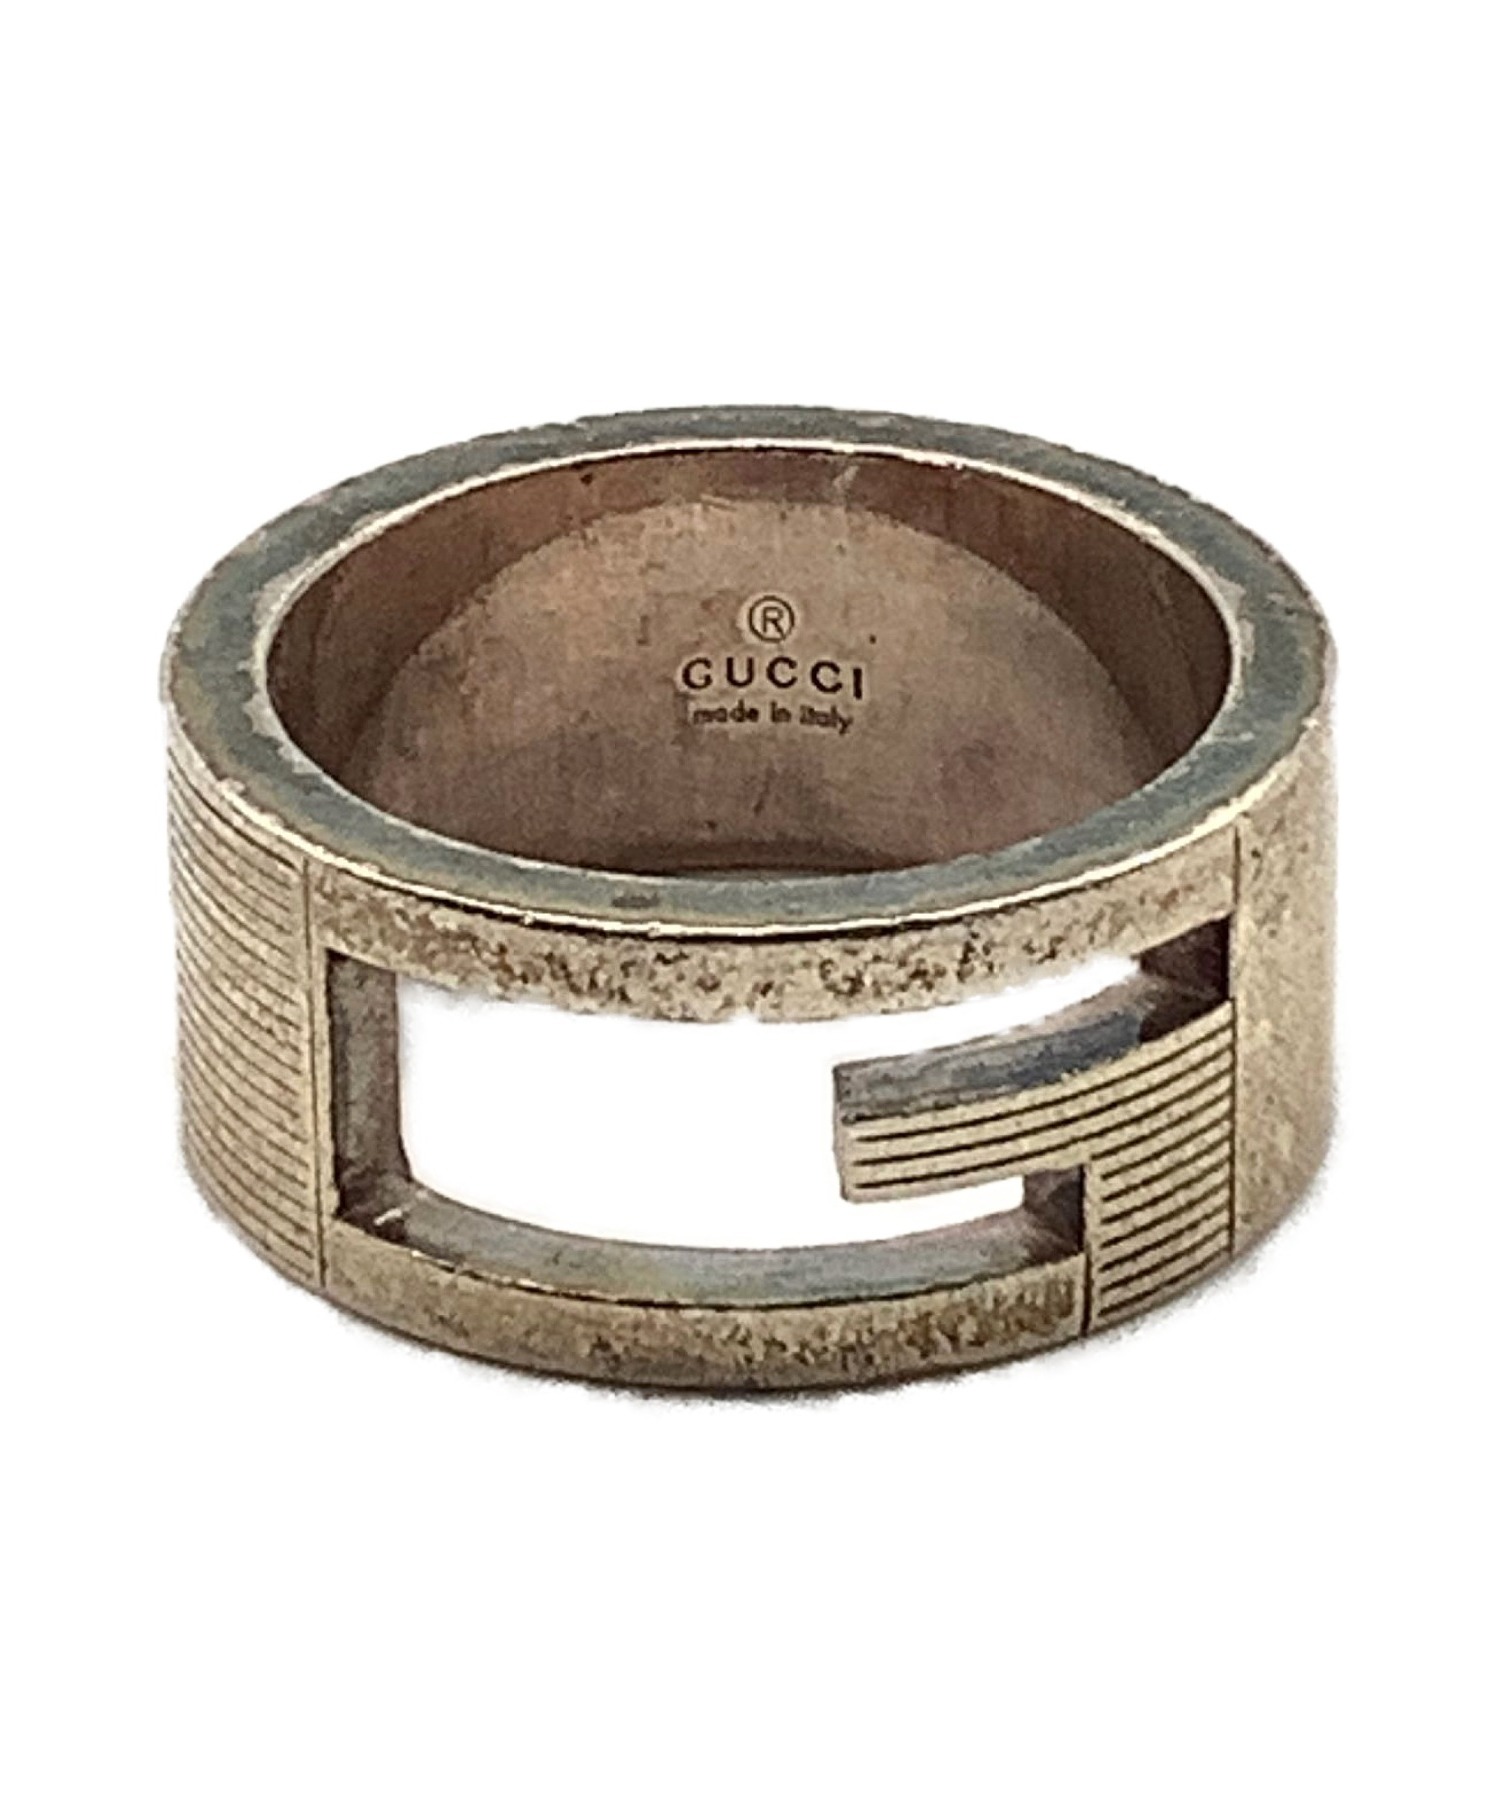 GUCCI (グッチ) ジーリング SILVER925